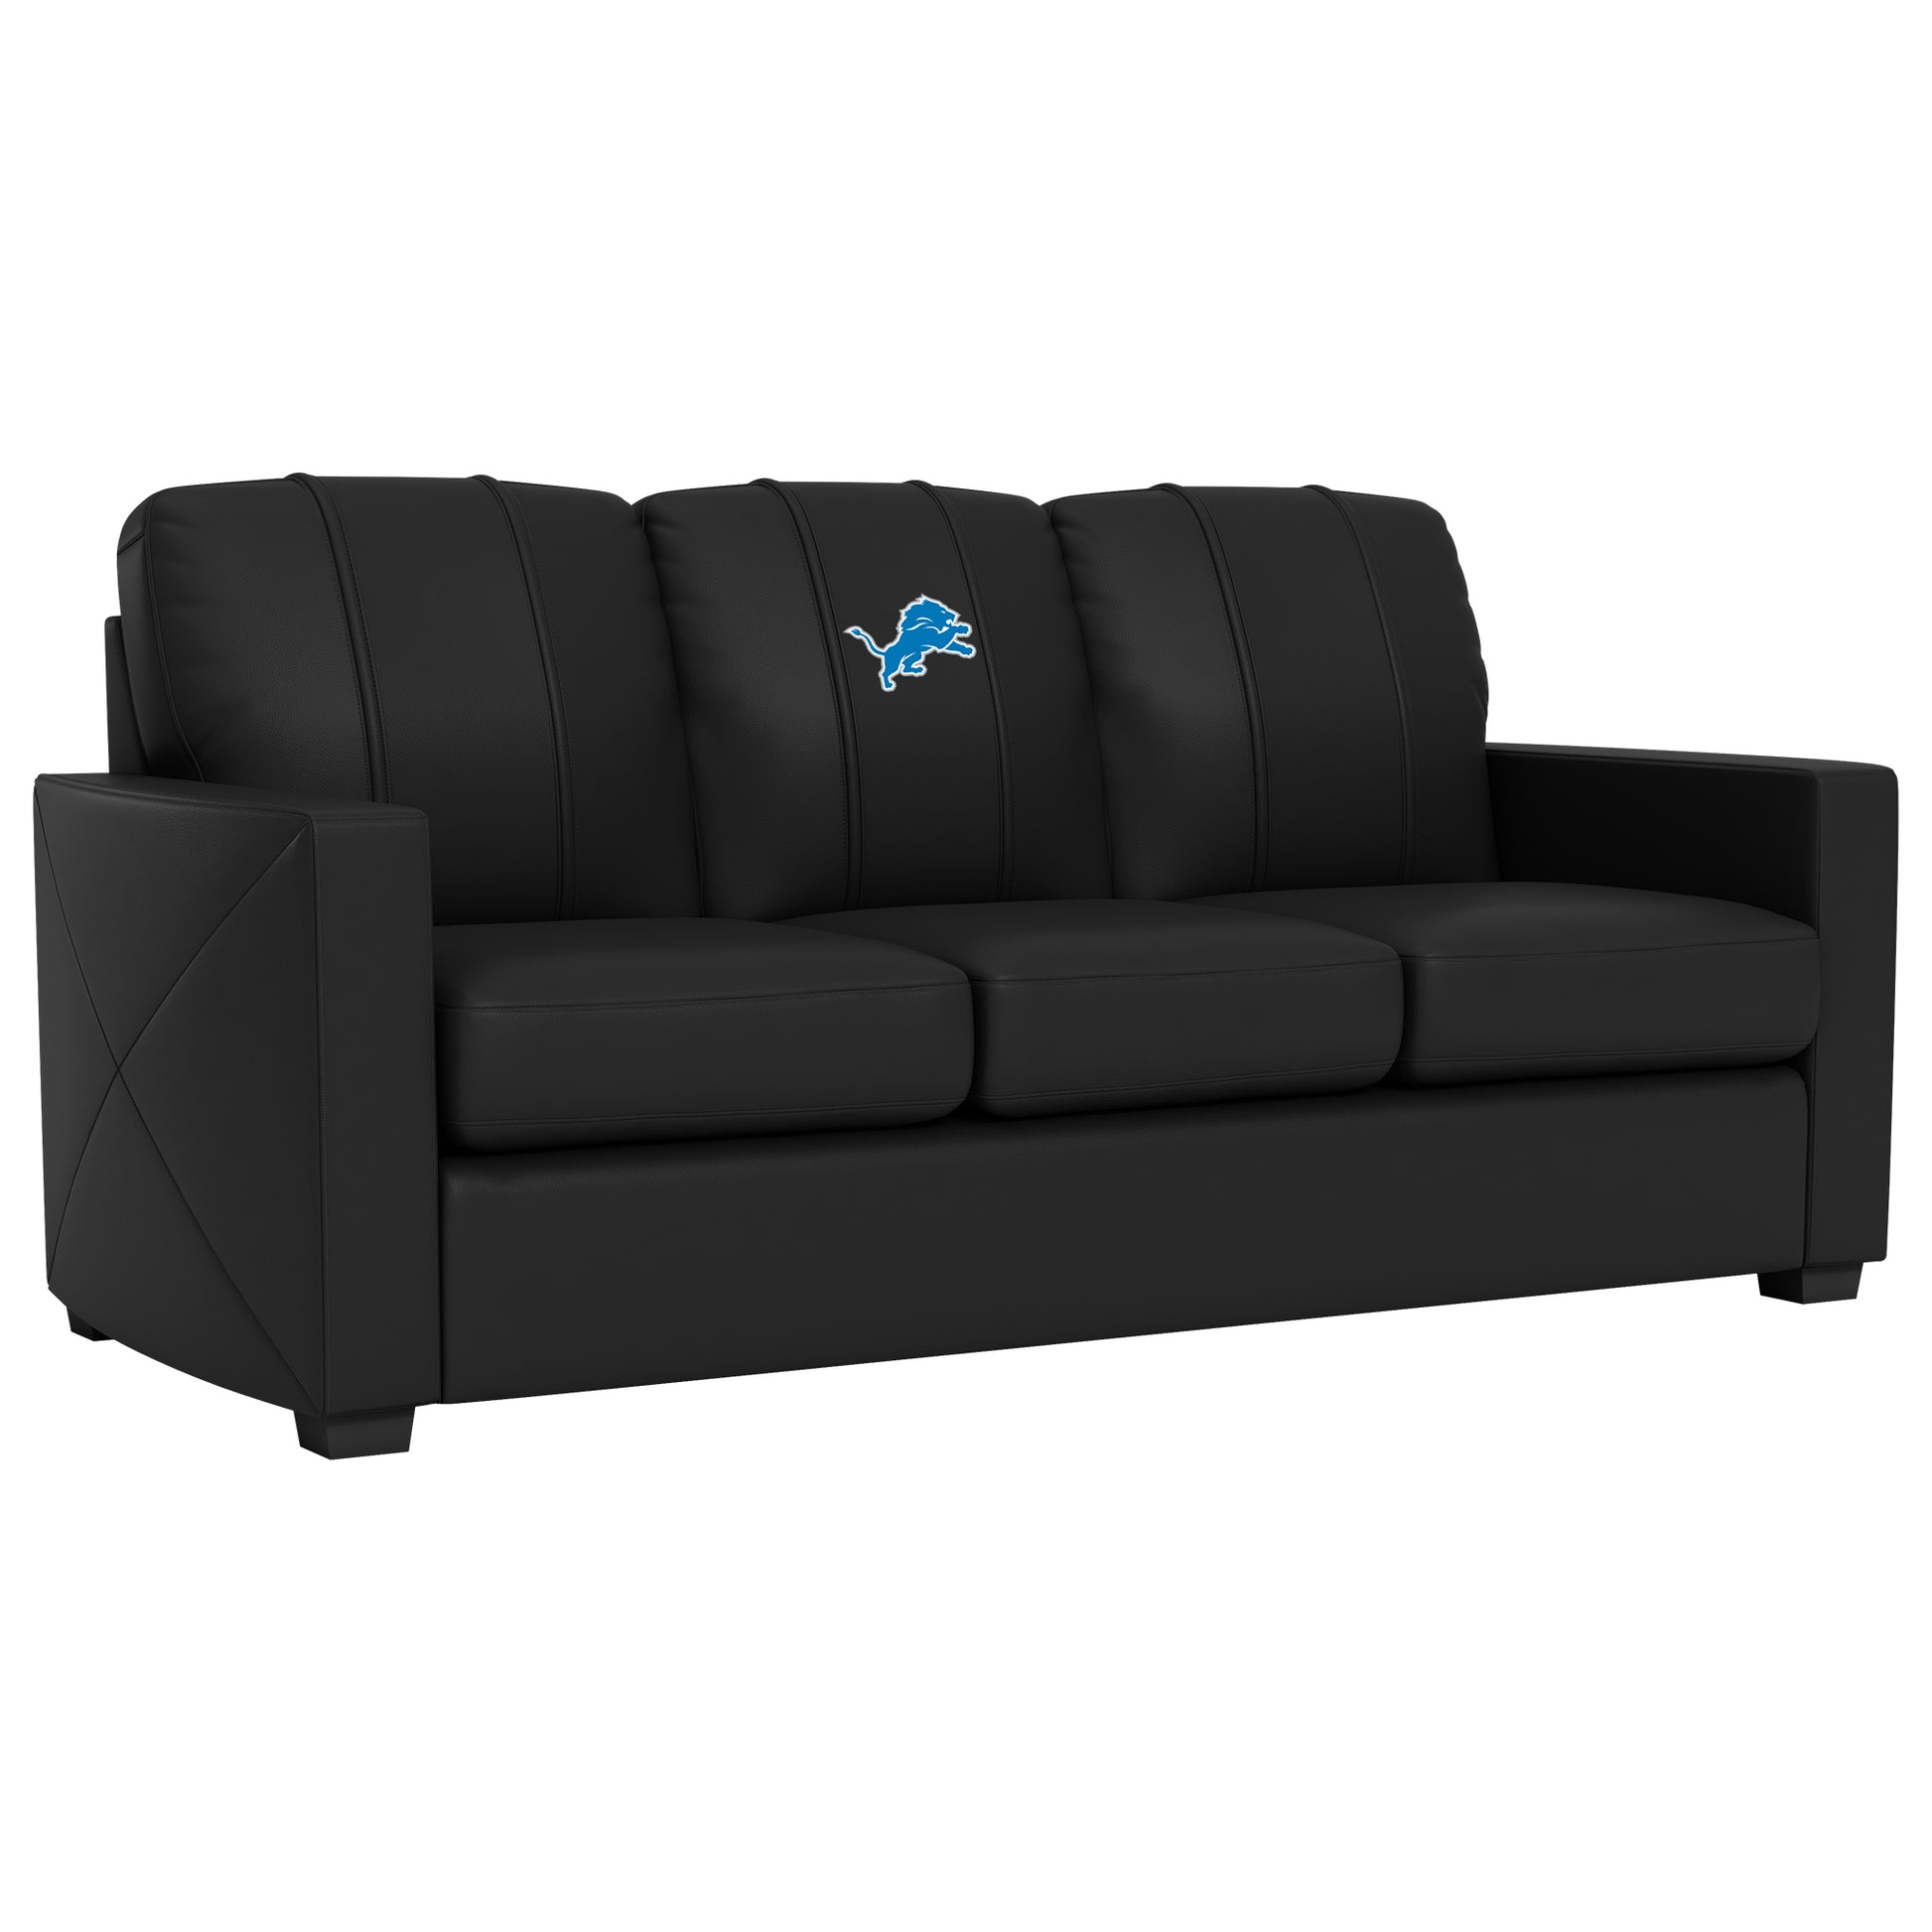 Silver Sofa With Detroit Lions Primary